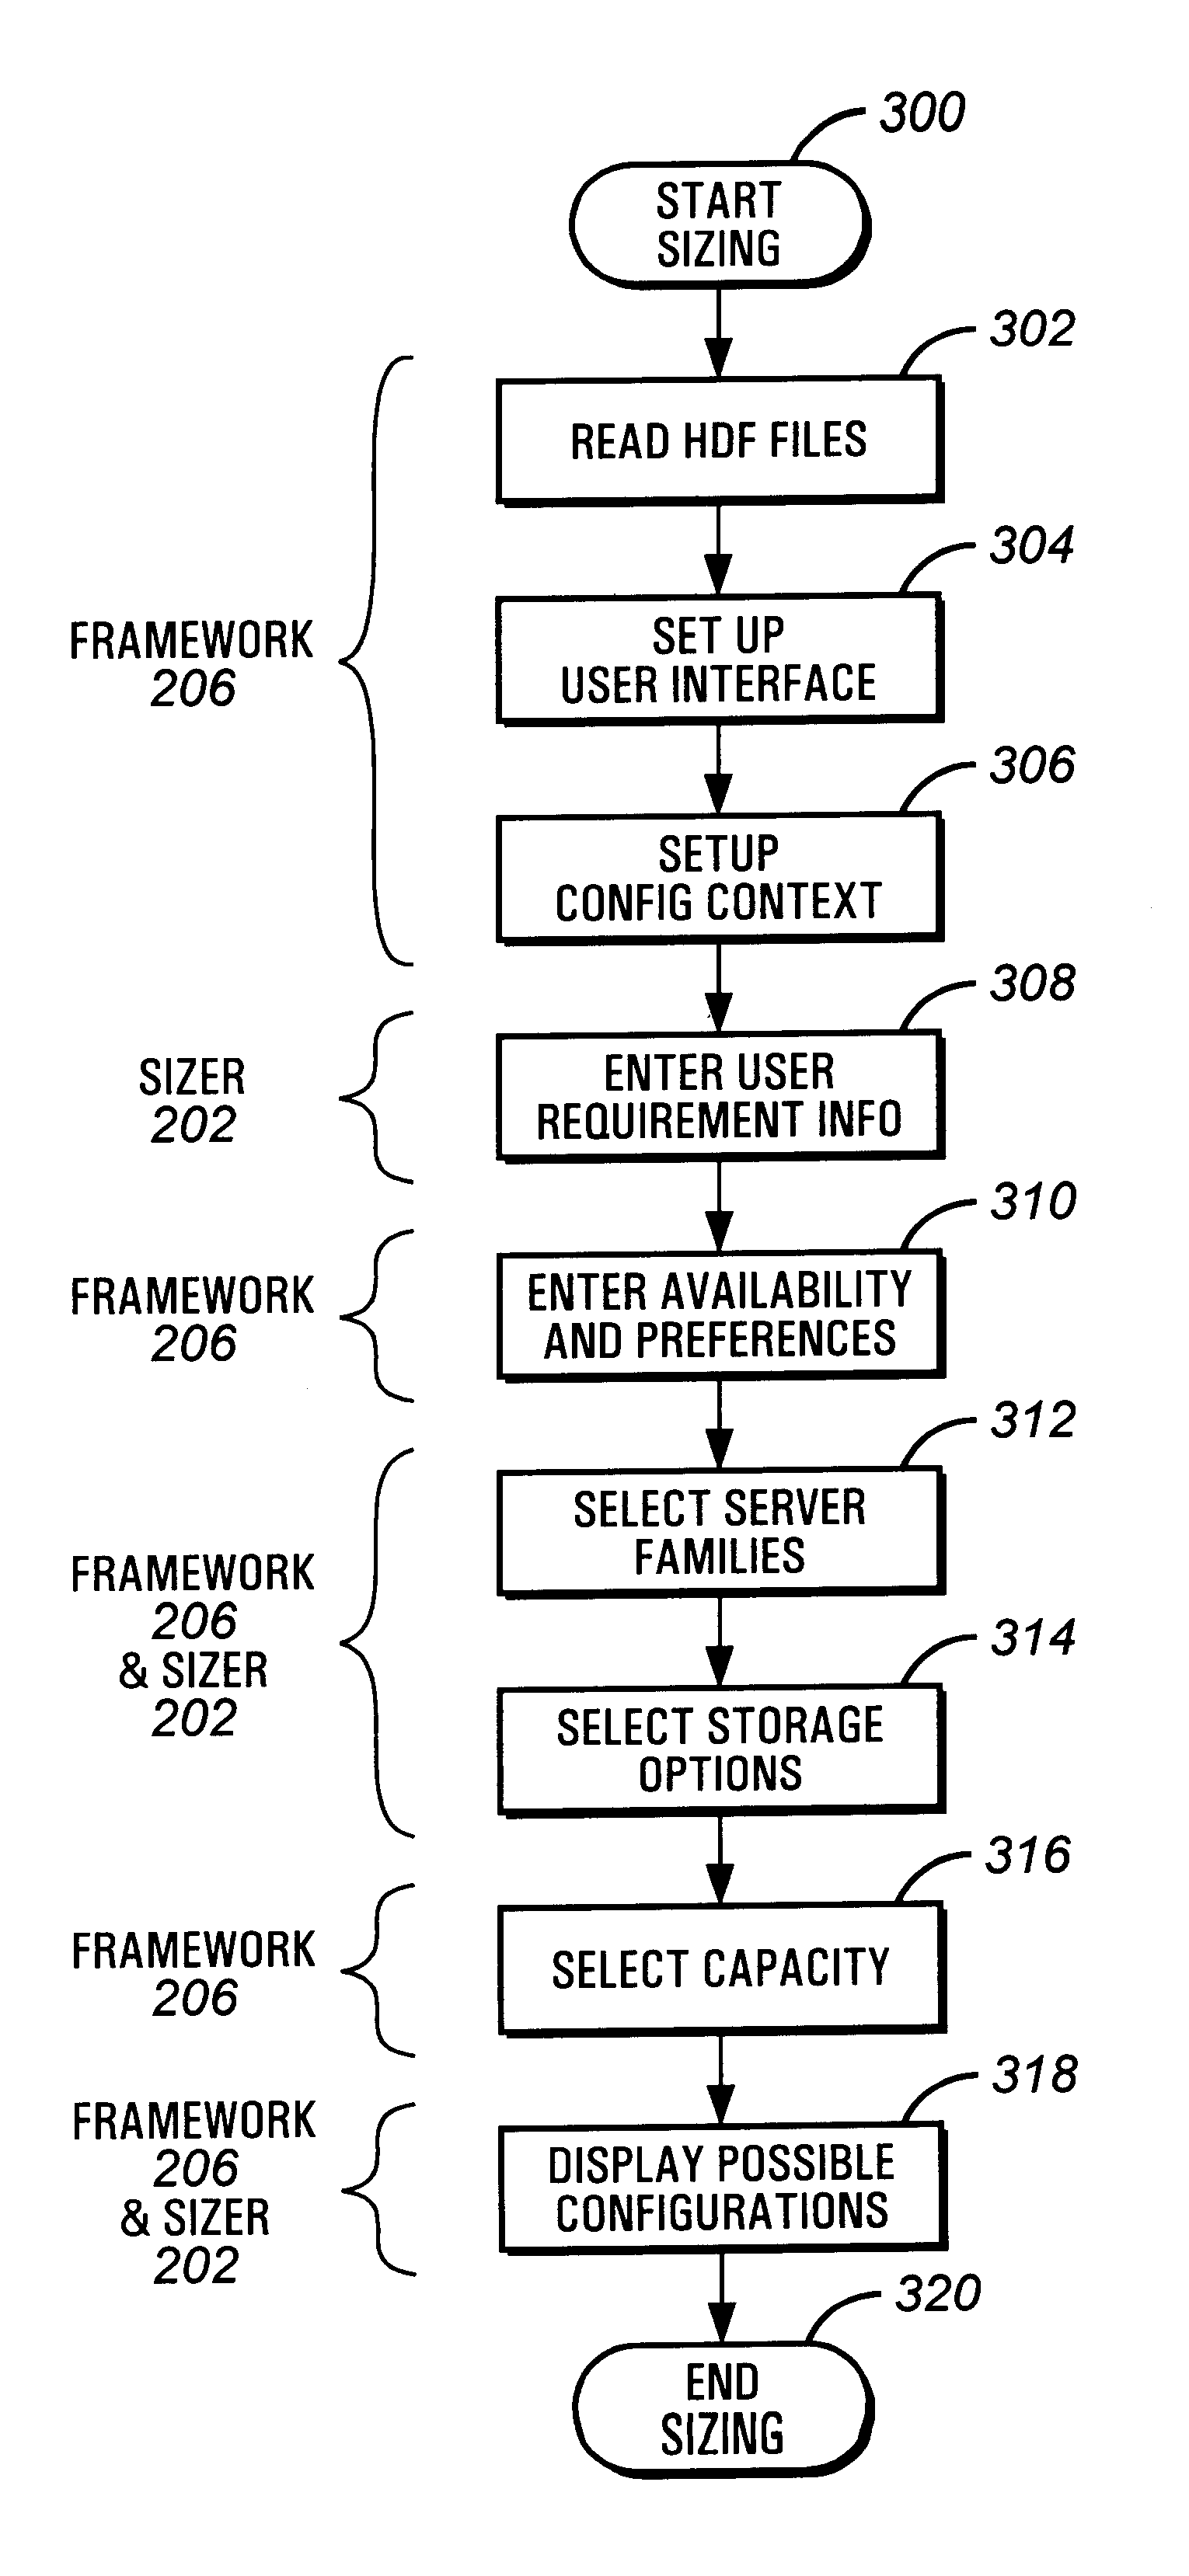 Configuration sizer for selecting system of computer components based on price/performance normalization